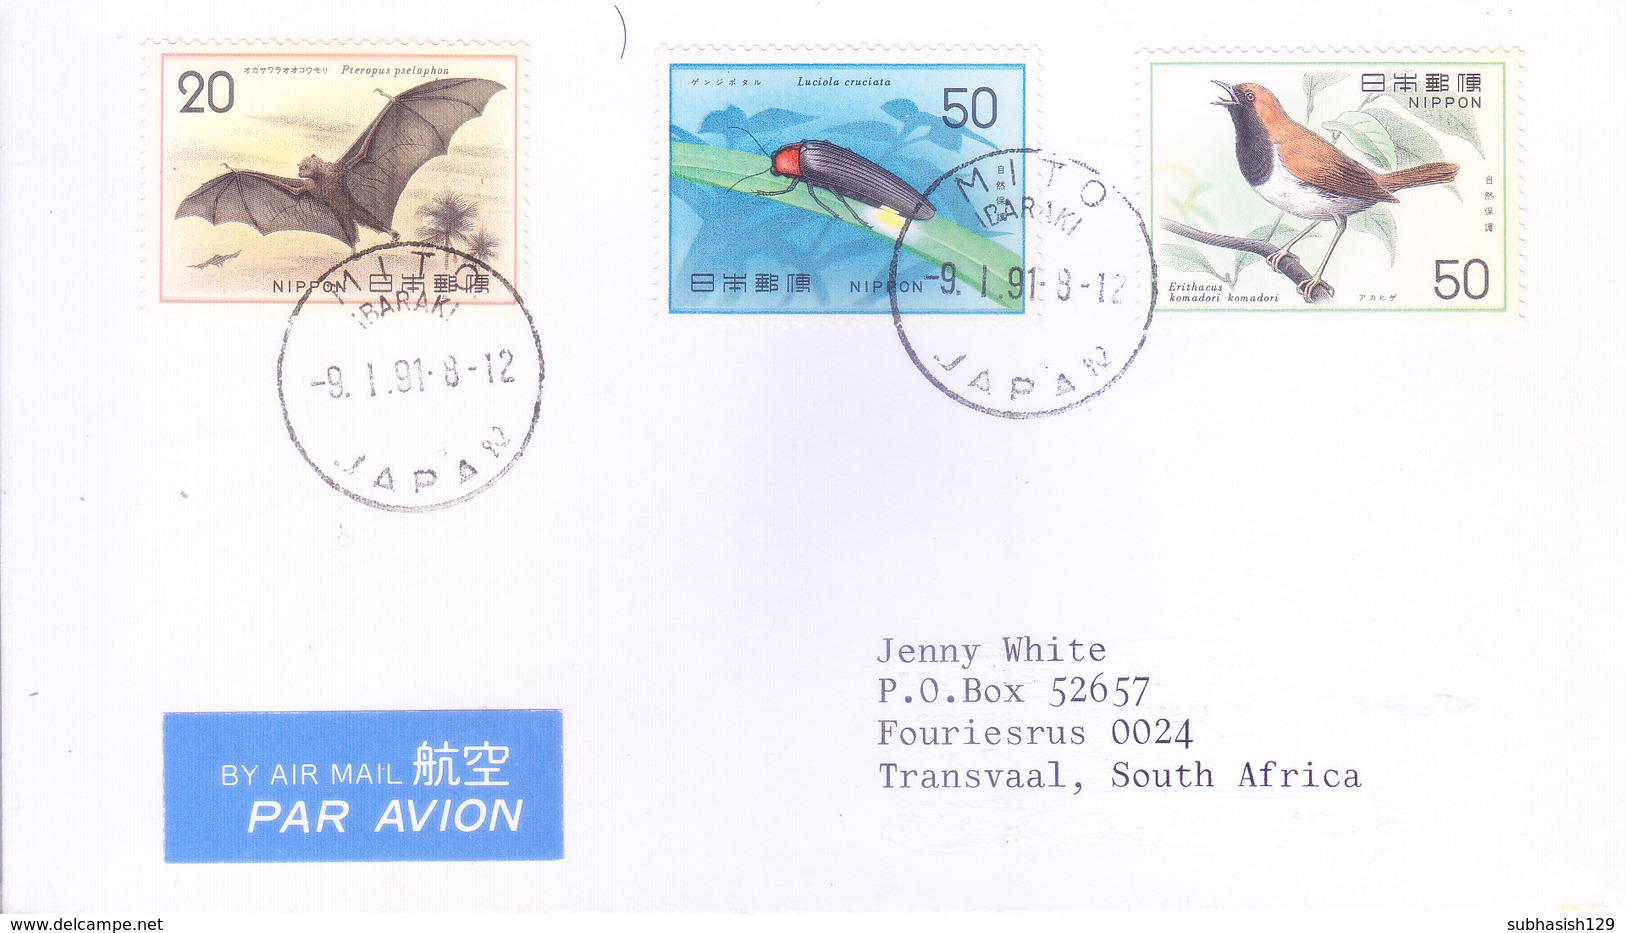 JAPAN : 1991 AIRMAIL COVER FOR POSTED FROM MITO FOR SOUTH AFRICA : USED OF 3v COMMEMORATIVE STAMPS - BIRD, INSECT, BAT - Covers & Documents